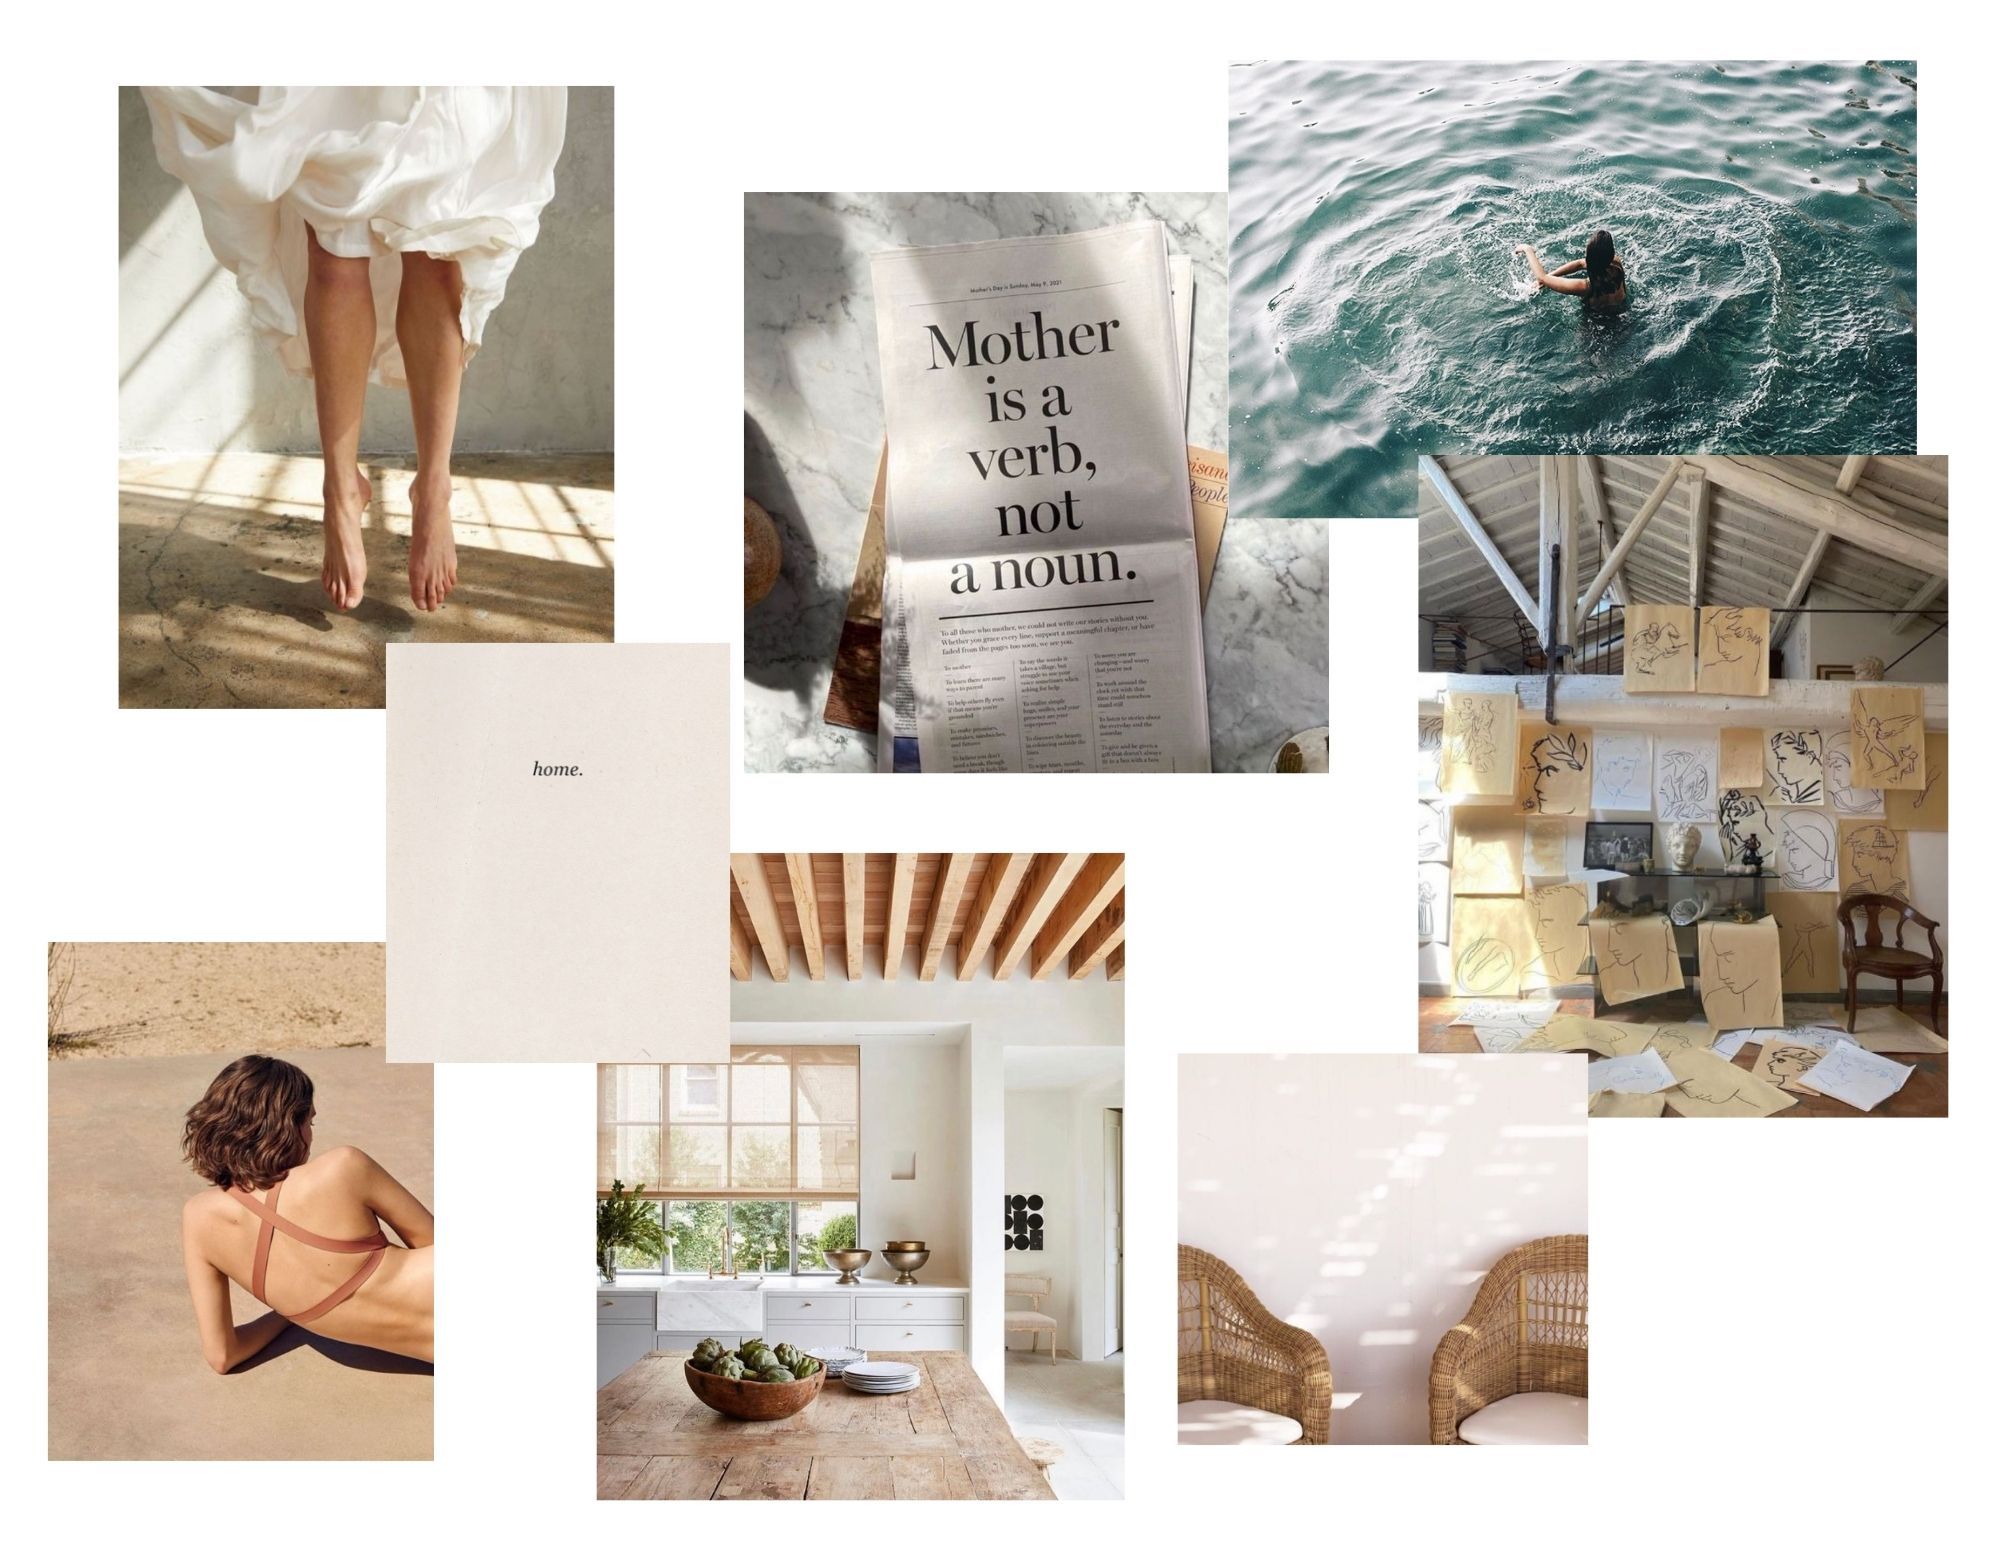 collage of photos depicting summer mood. woman on beach, woman jumping barefoot, photo with words home, two wicker chairs, woman swimming in water, art strewn on wall, kitchen, newspaper reading mother is a verb not a noun.